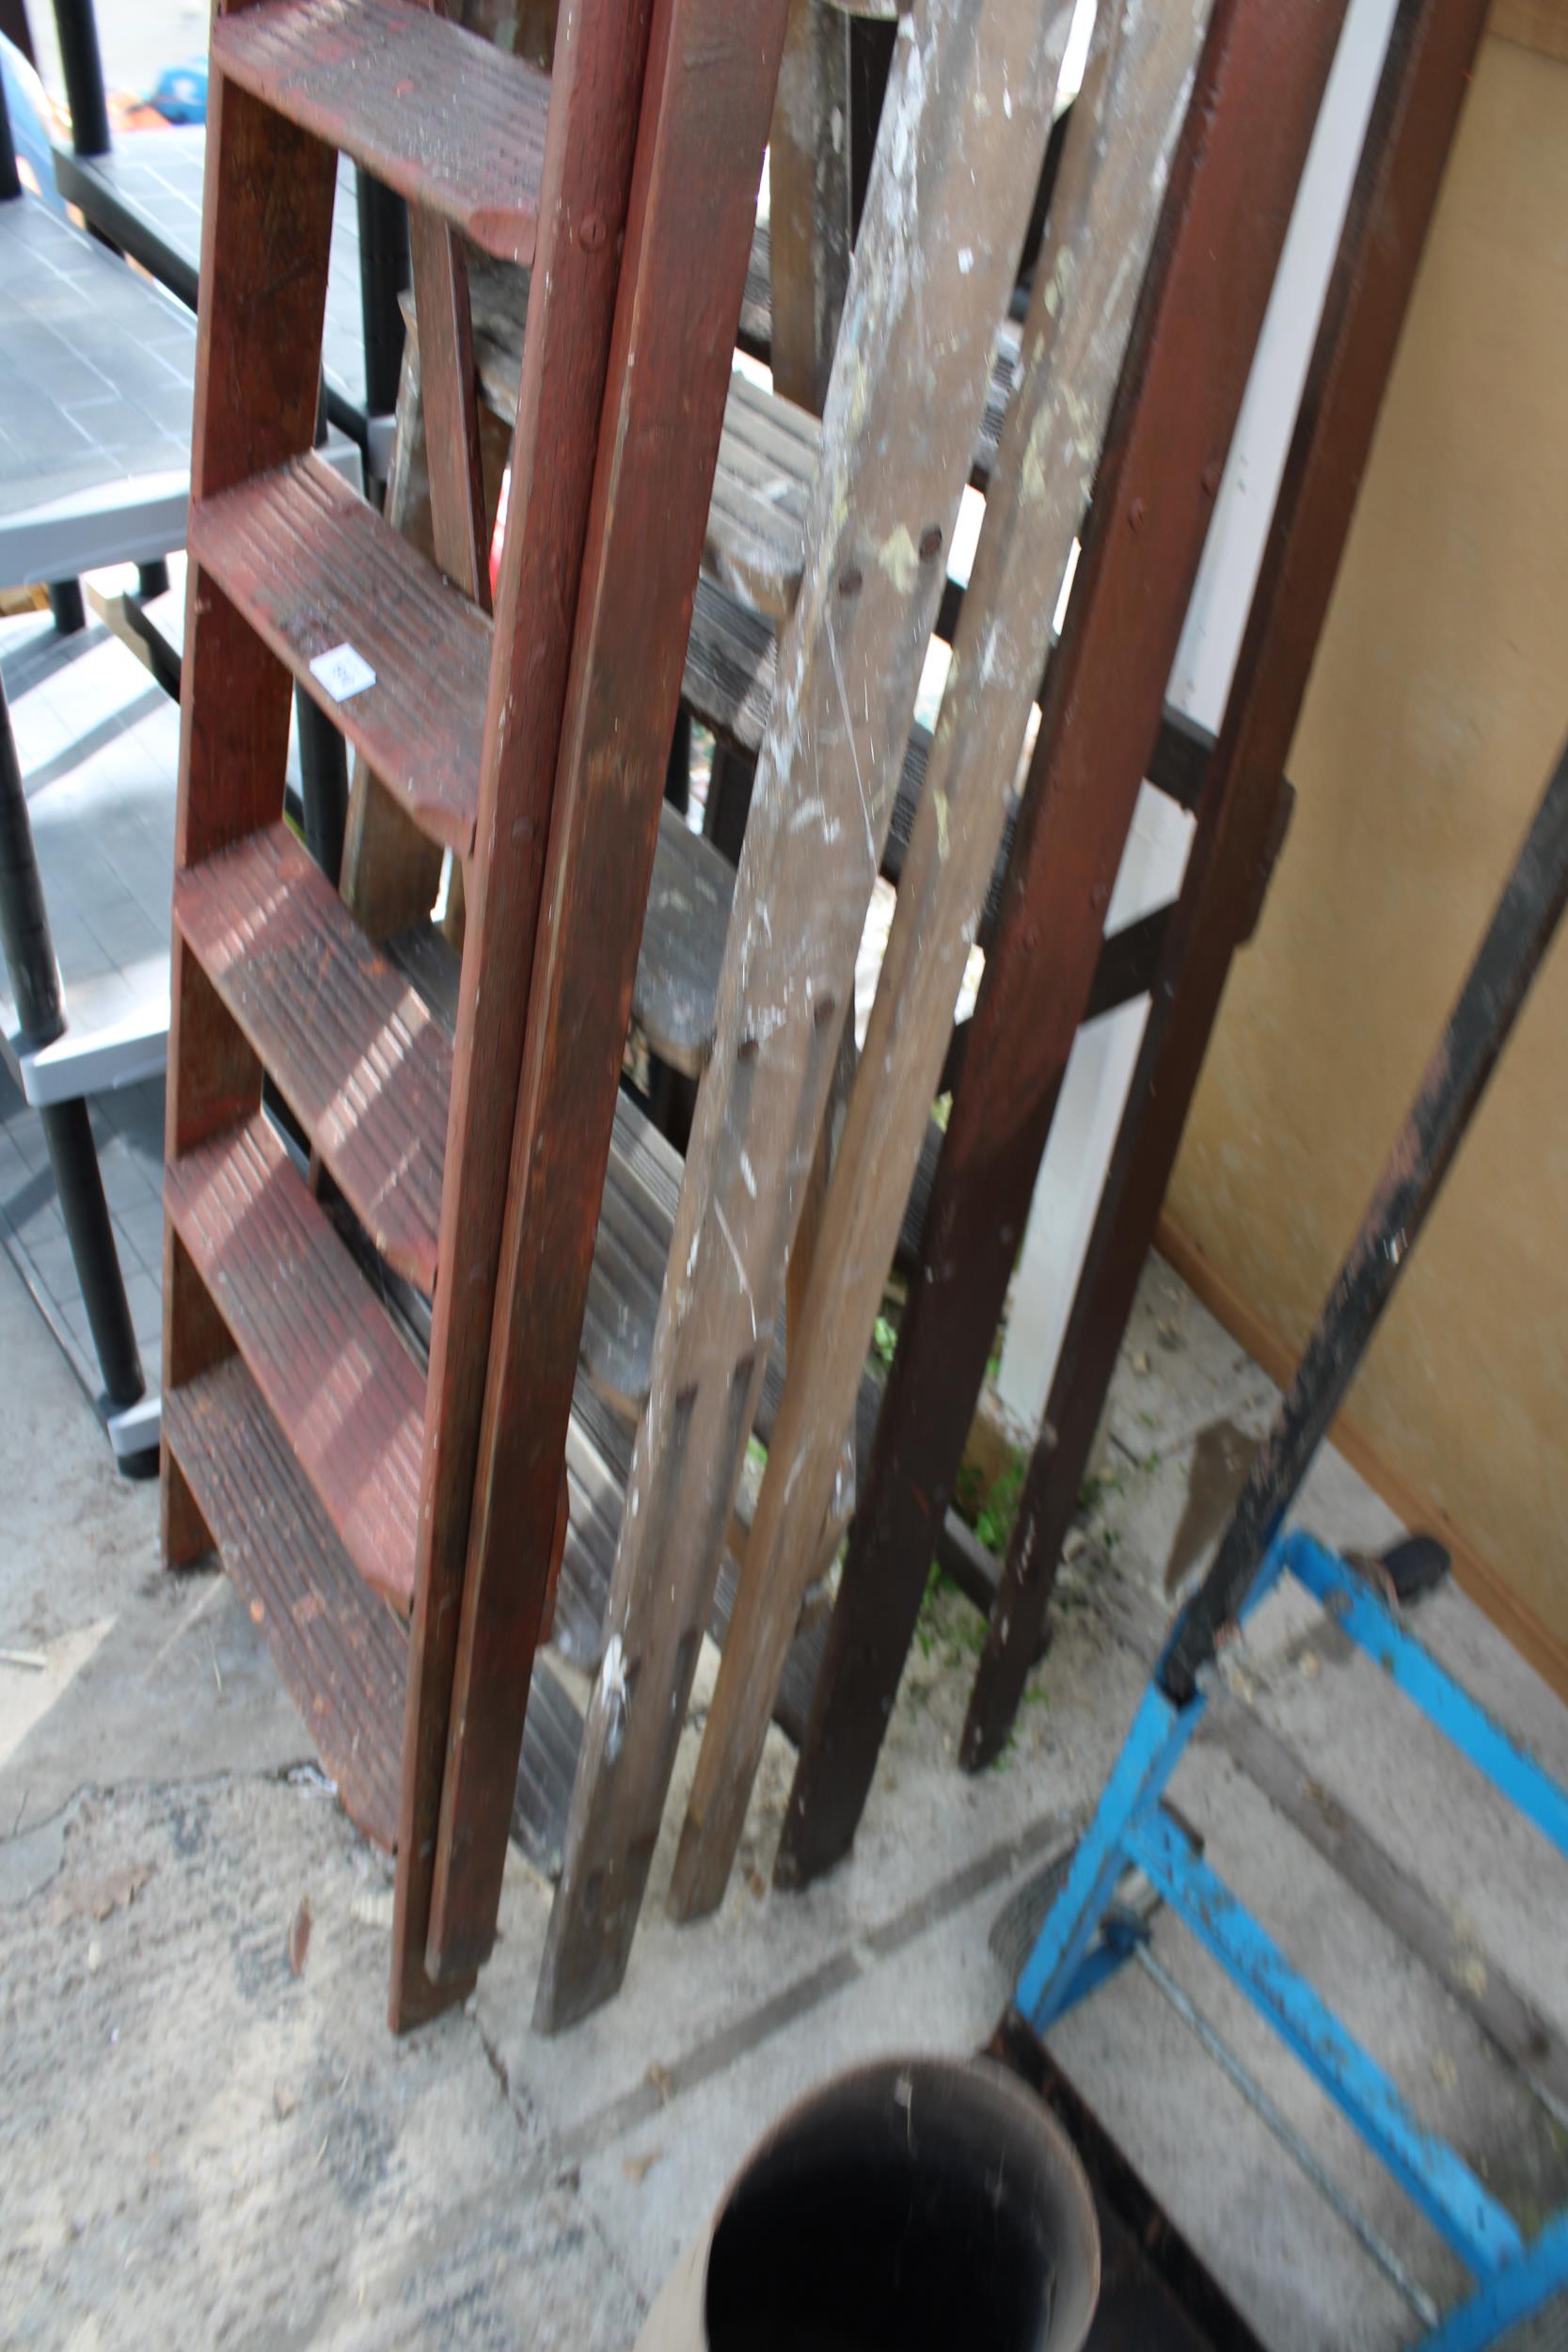 A VINTAGE WOODEN SIX RUNG STEP LADDER AND A VINTAGE WOODEN 5 RUNG STEP LADDER - Image 2 of 3